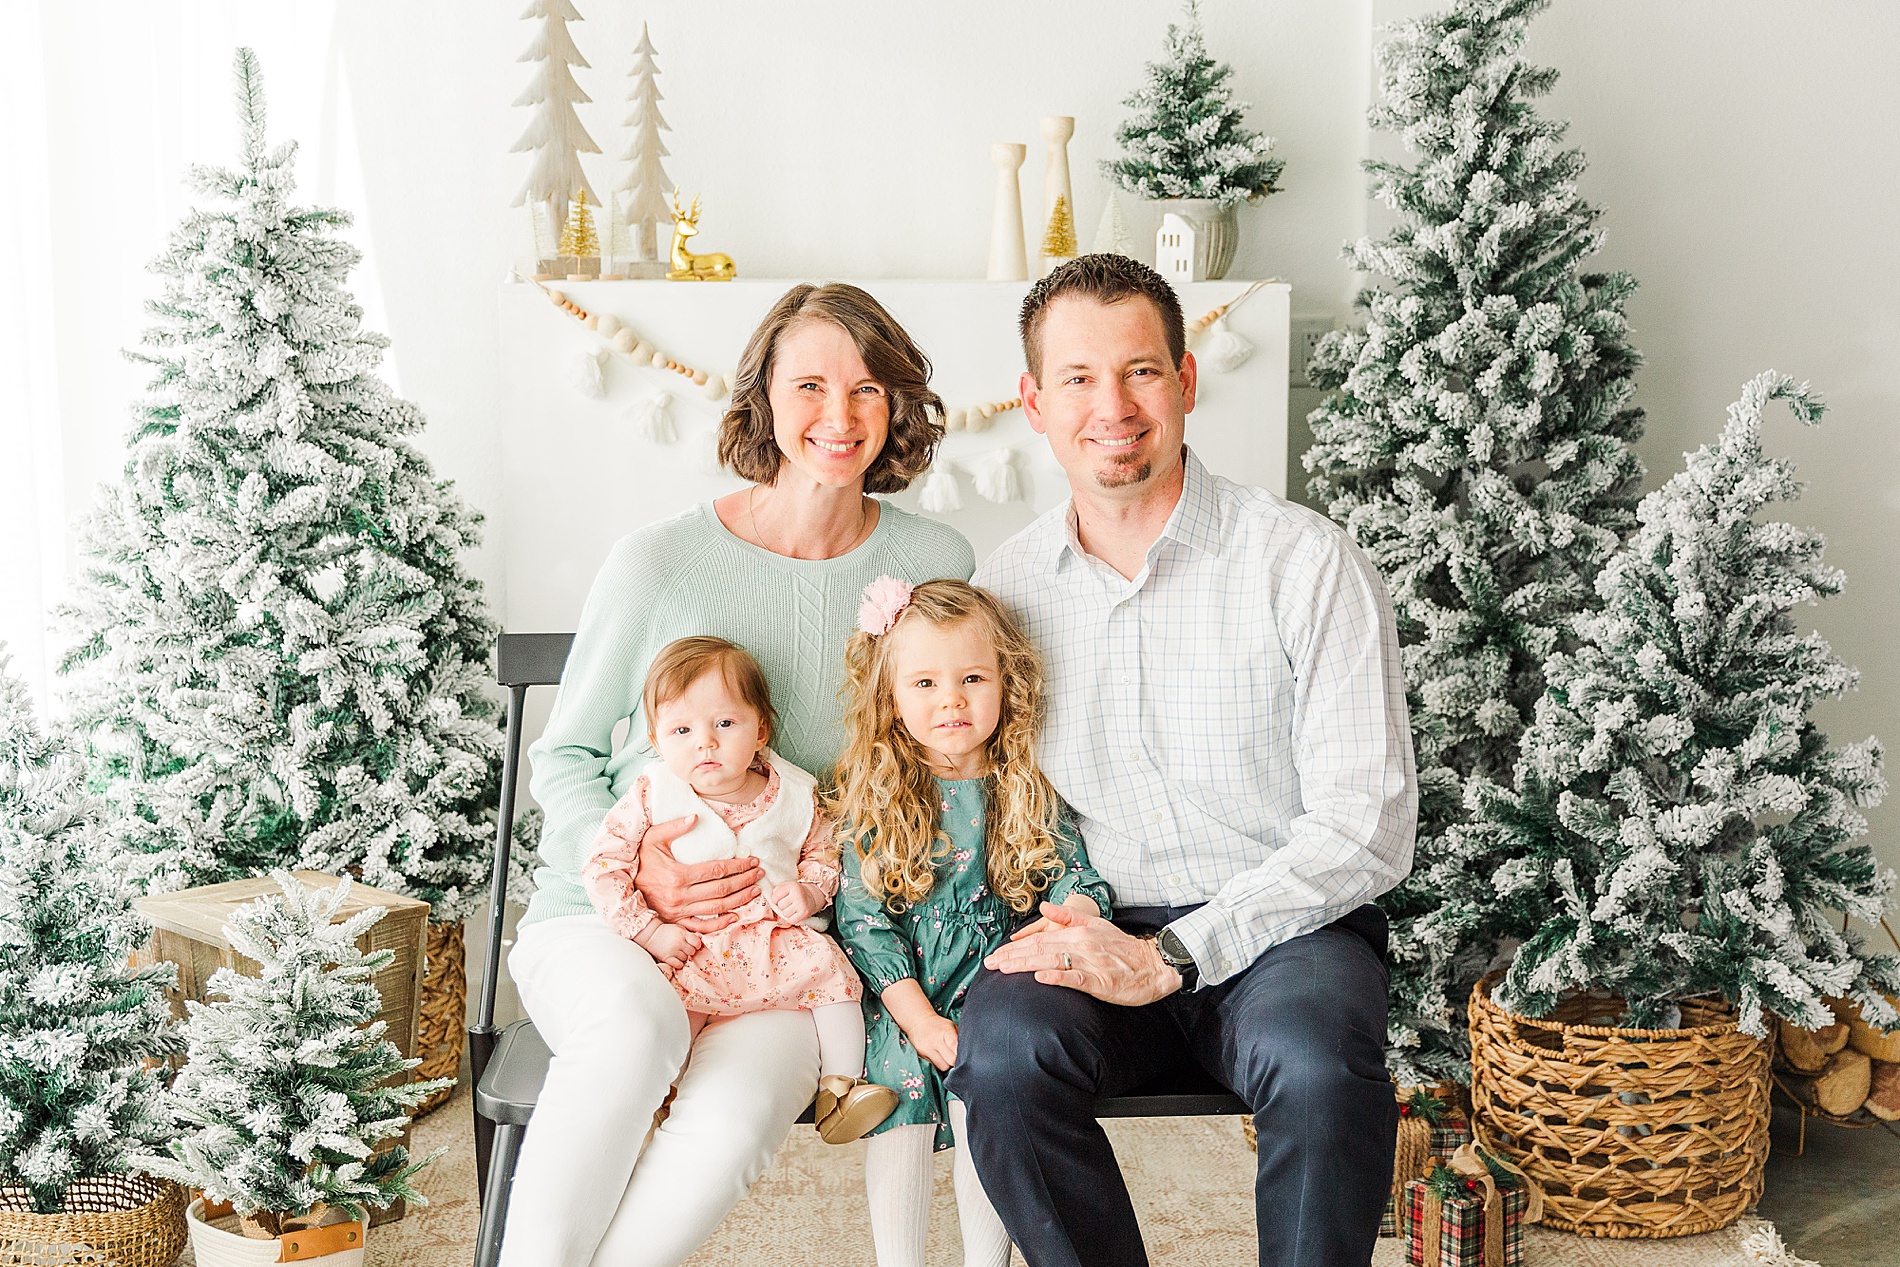 parents with two young girls sit together on a bench for a holiday mini session